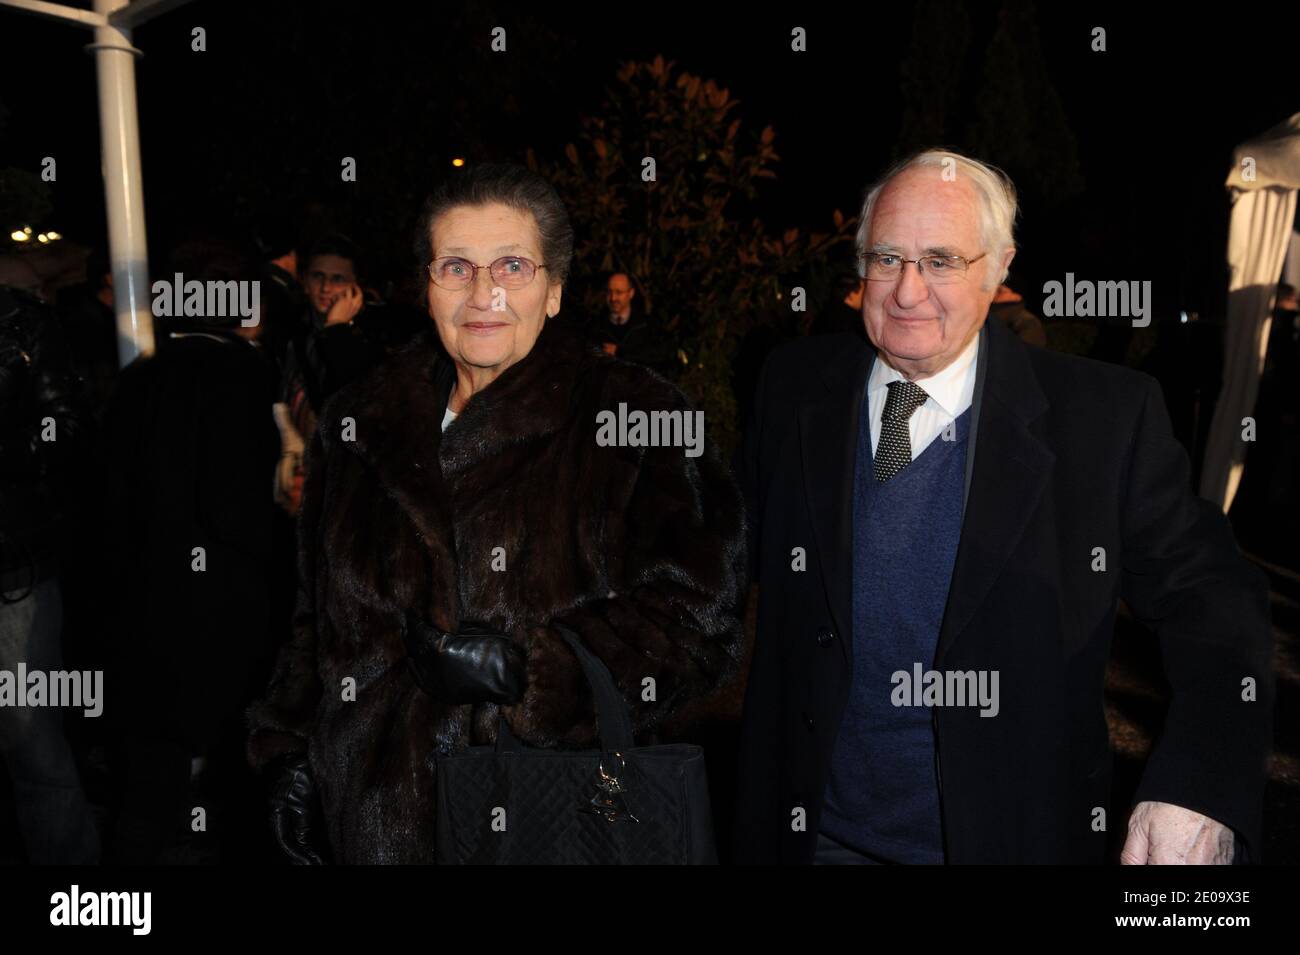 Simone Veil and husband Antoine arrive to attend the annual Representative Council of France's Jewish Associations (CRIF) dinner at the Pavillon d'Armenonville in Paris, France on February 8, 2012. Photo by Ammar Abd Rabbo/ABACAPRESS.COM Stock Photo